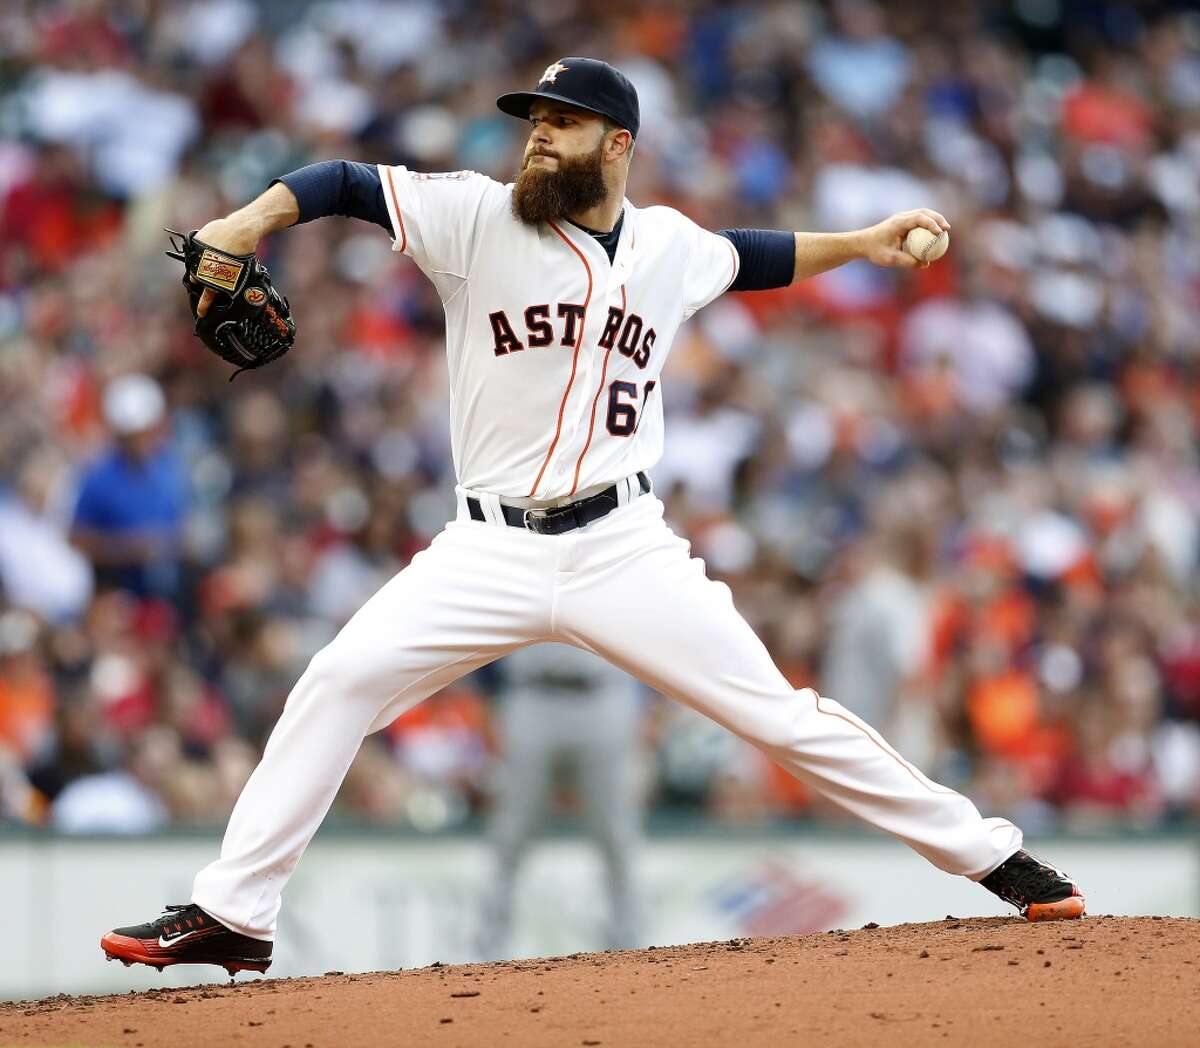 ASTROS 5. Dallas Keuchel, No. 60 Fans are waiting for him to regain his Cy Young form from last year, but the bearded lefty with his own section at Minute Maid Park has earned his ranking on this list with his work over the past couple seasons. Another guy who should be around for a while.